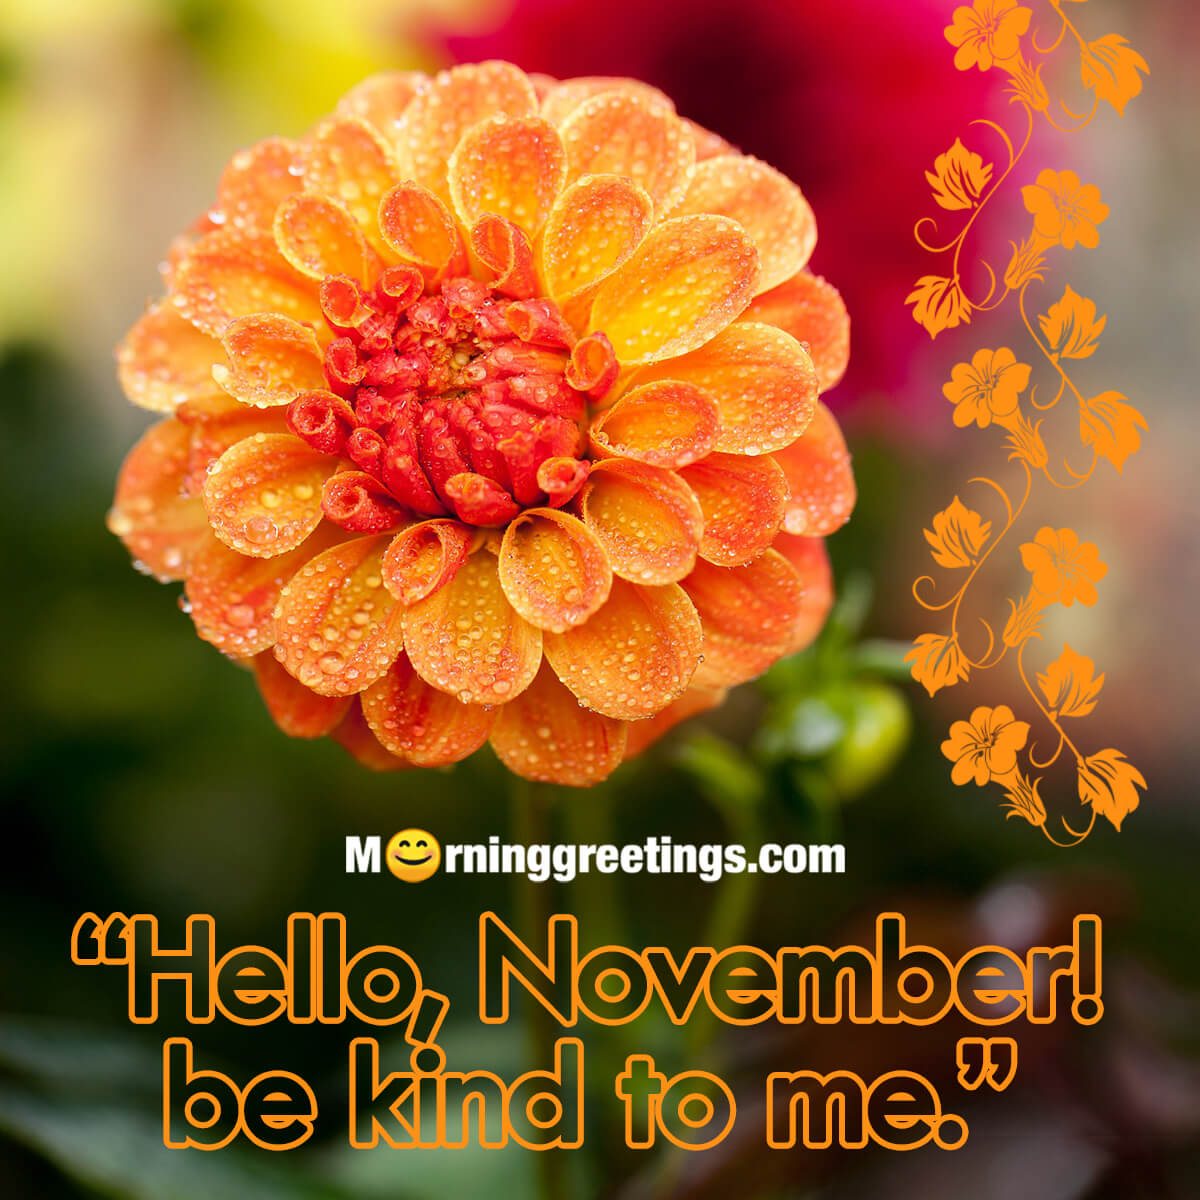 40 Best November Morning Quotes And Wishes - Morning Greetings ...